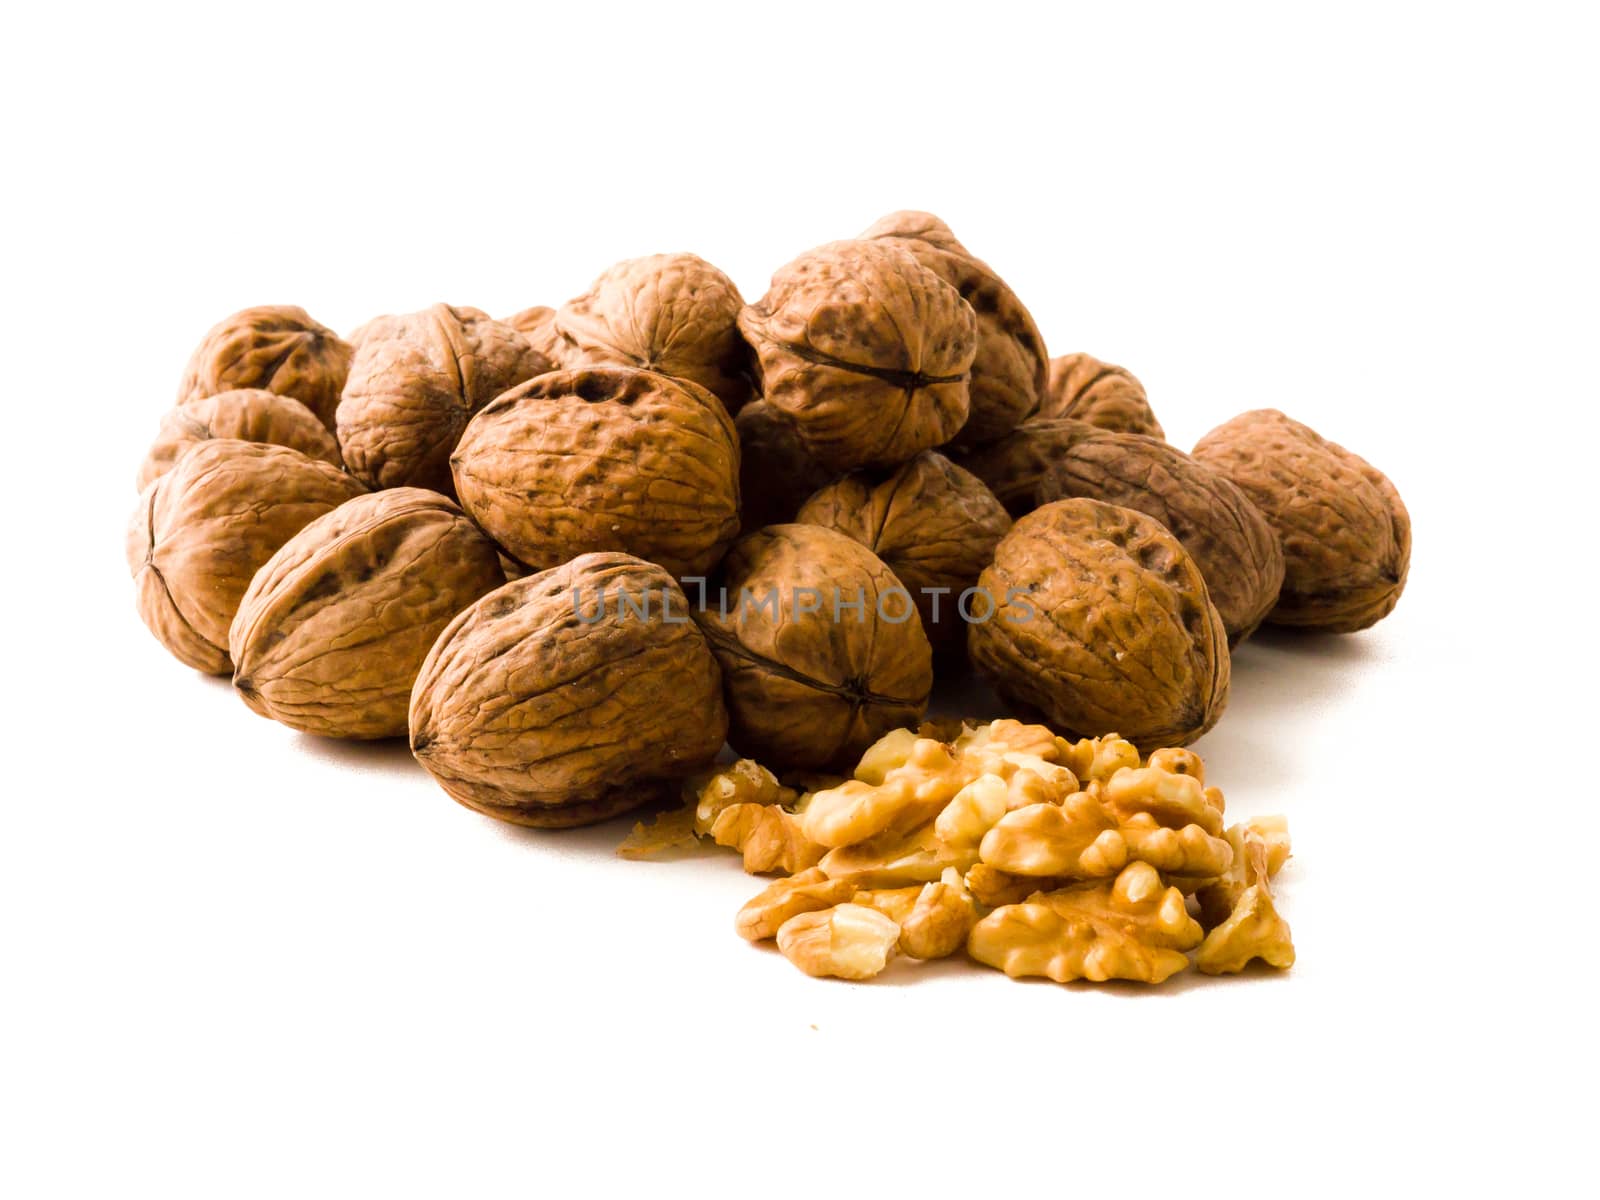 Brown walnuts isolated on white background.